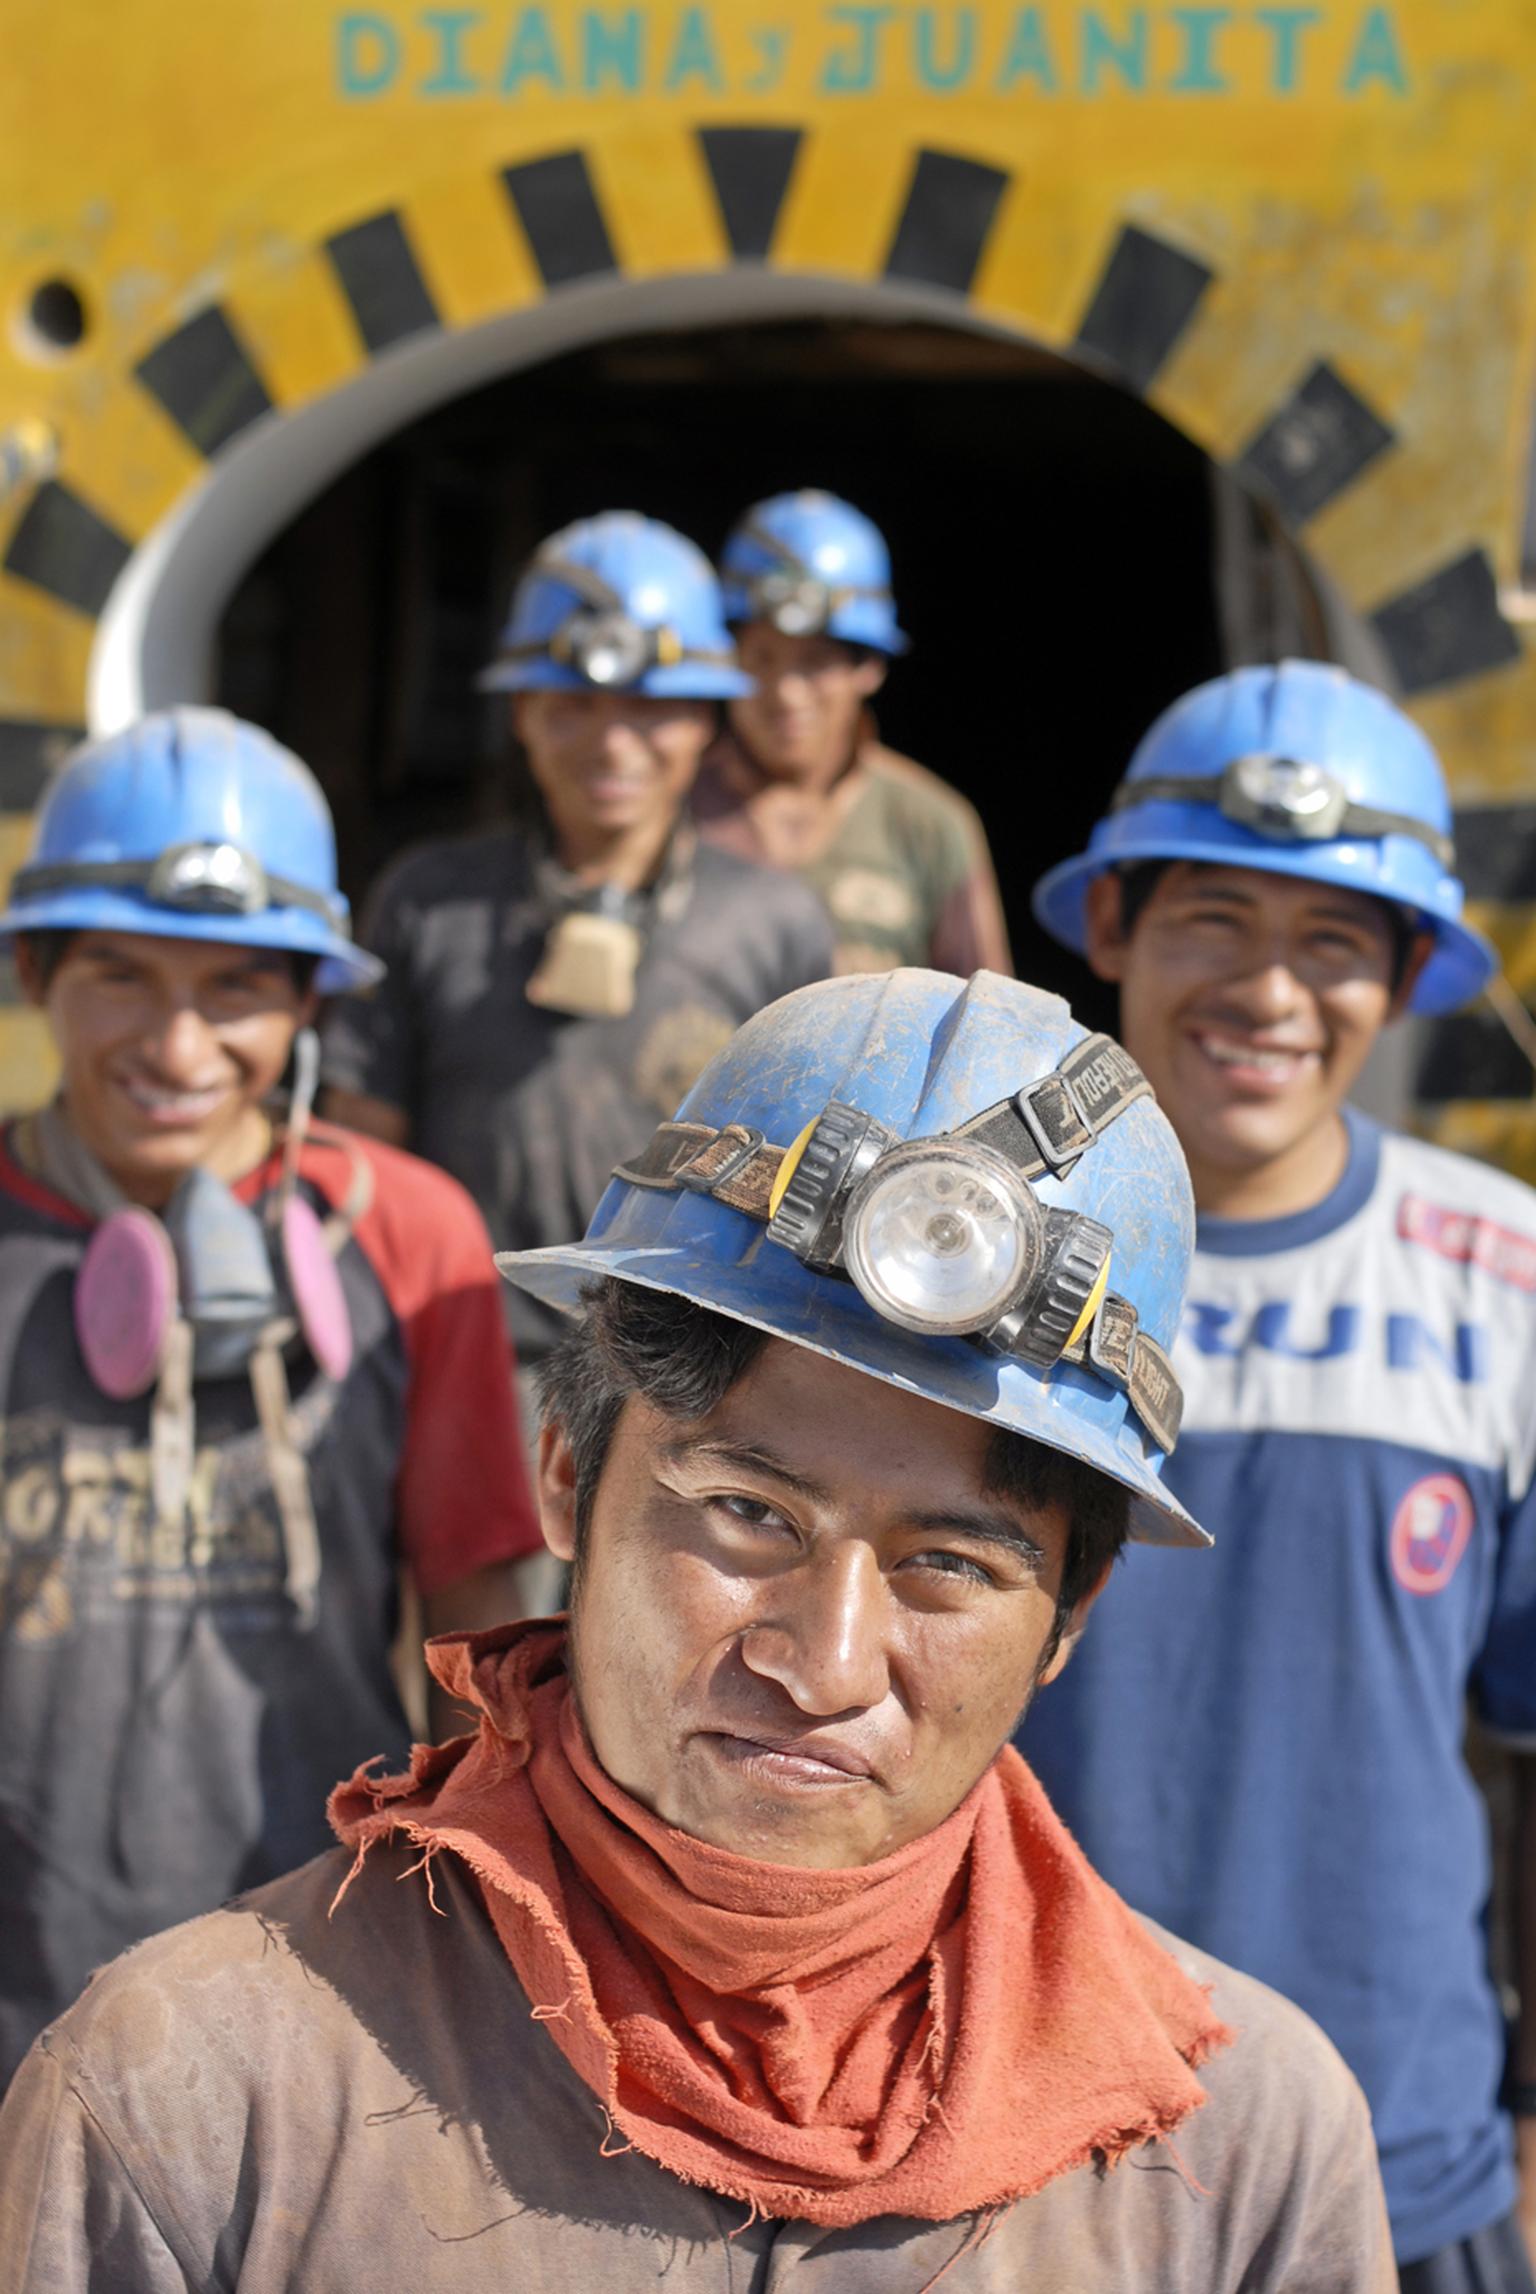 Thanks to the Fairmined standard, anyone who buys gold or other Fairmined-certified metals directly supports those working in community mines